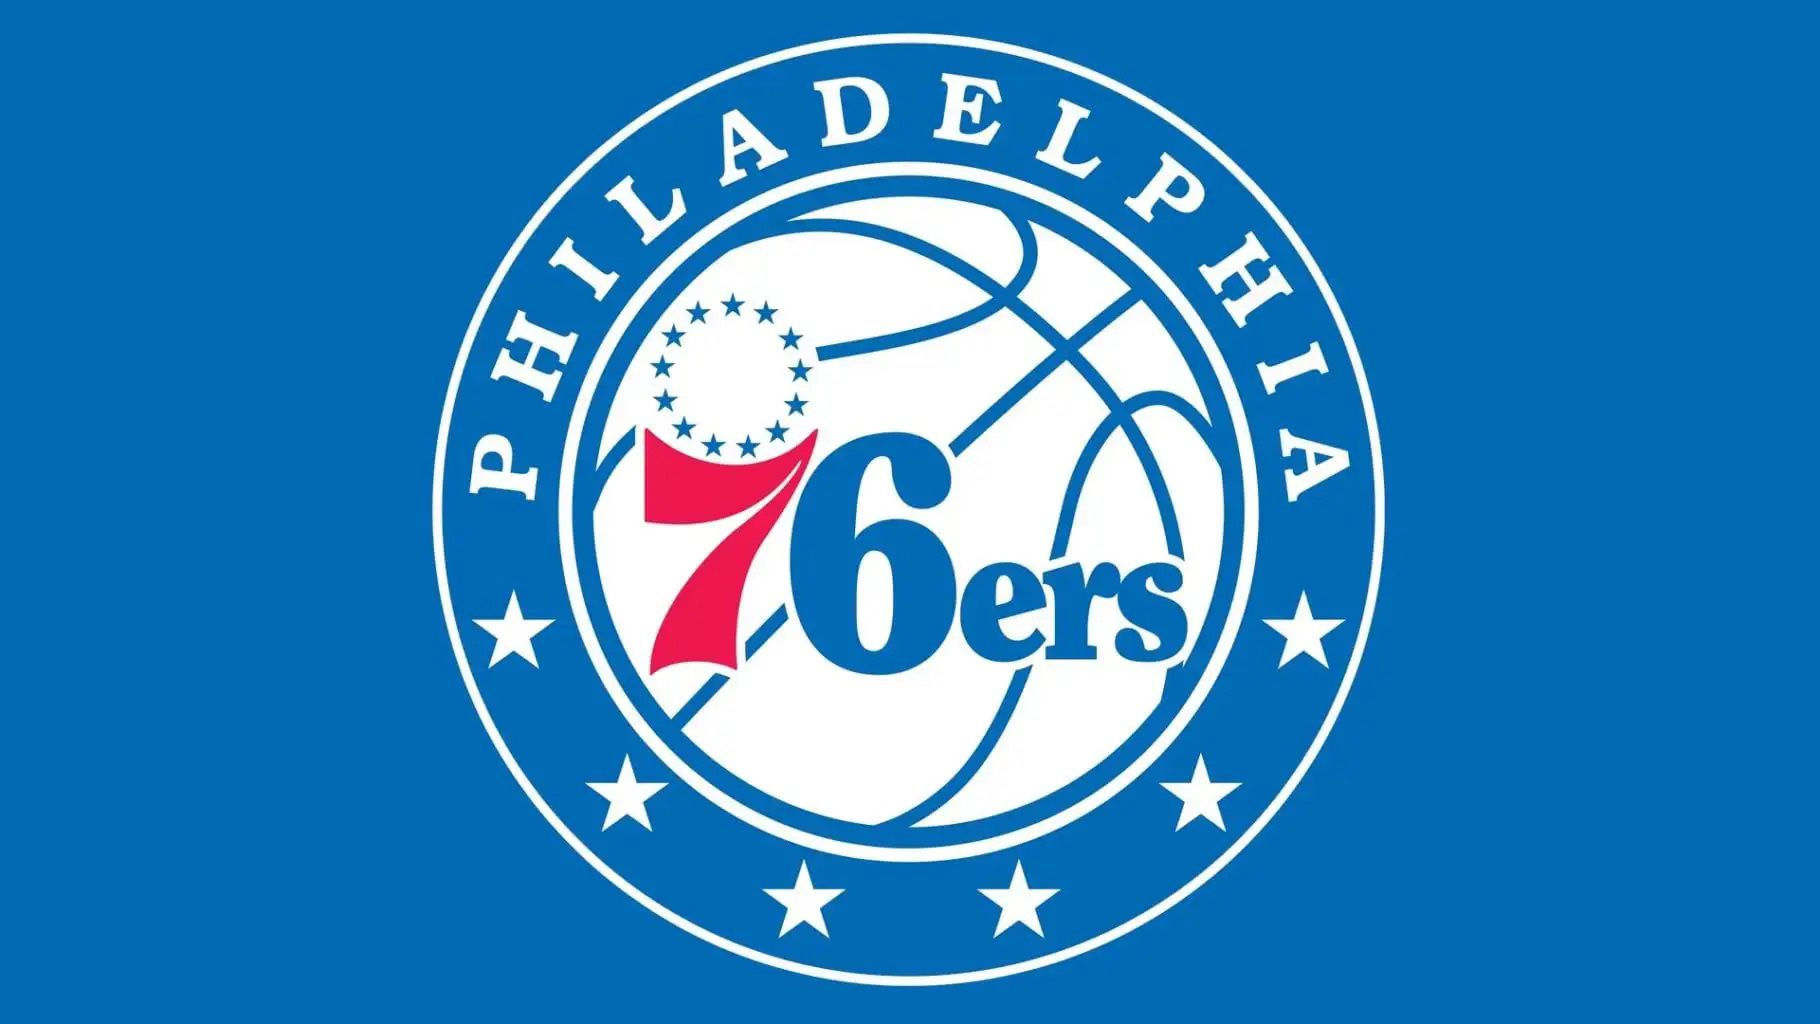 Sixers Tickets Sec 120 Row 17 Seats 9 And 10 $90 Per Ticket ($180 For Both))